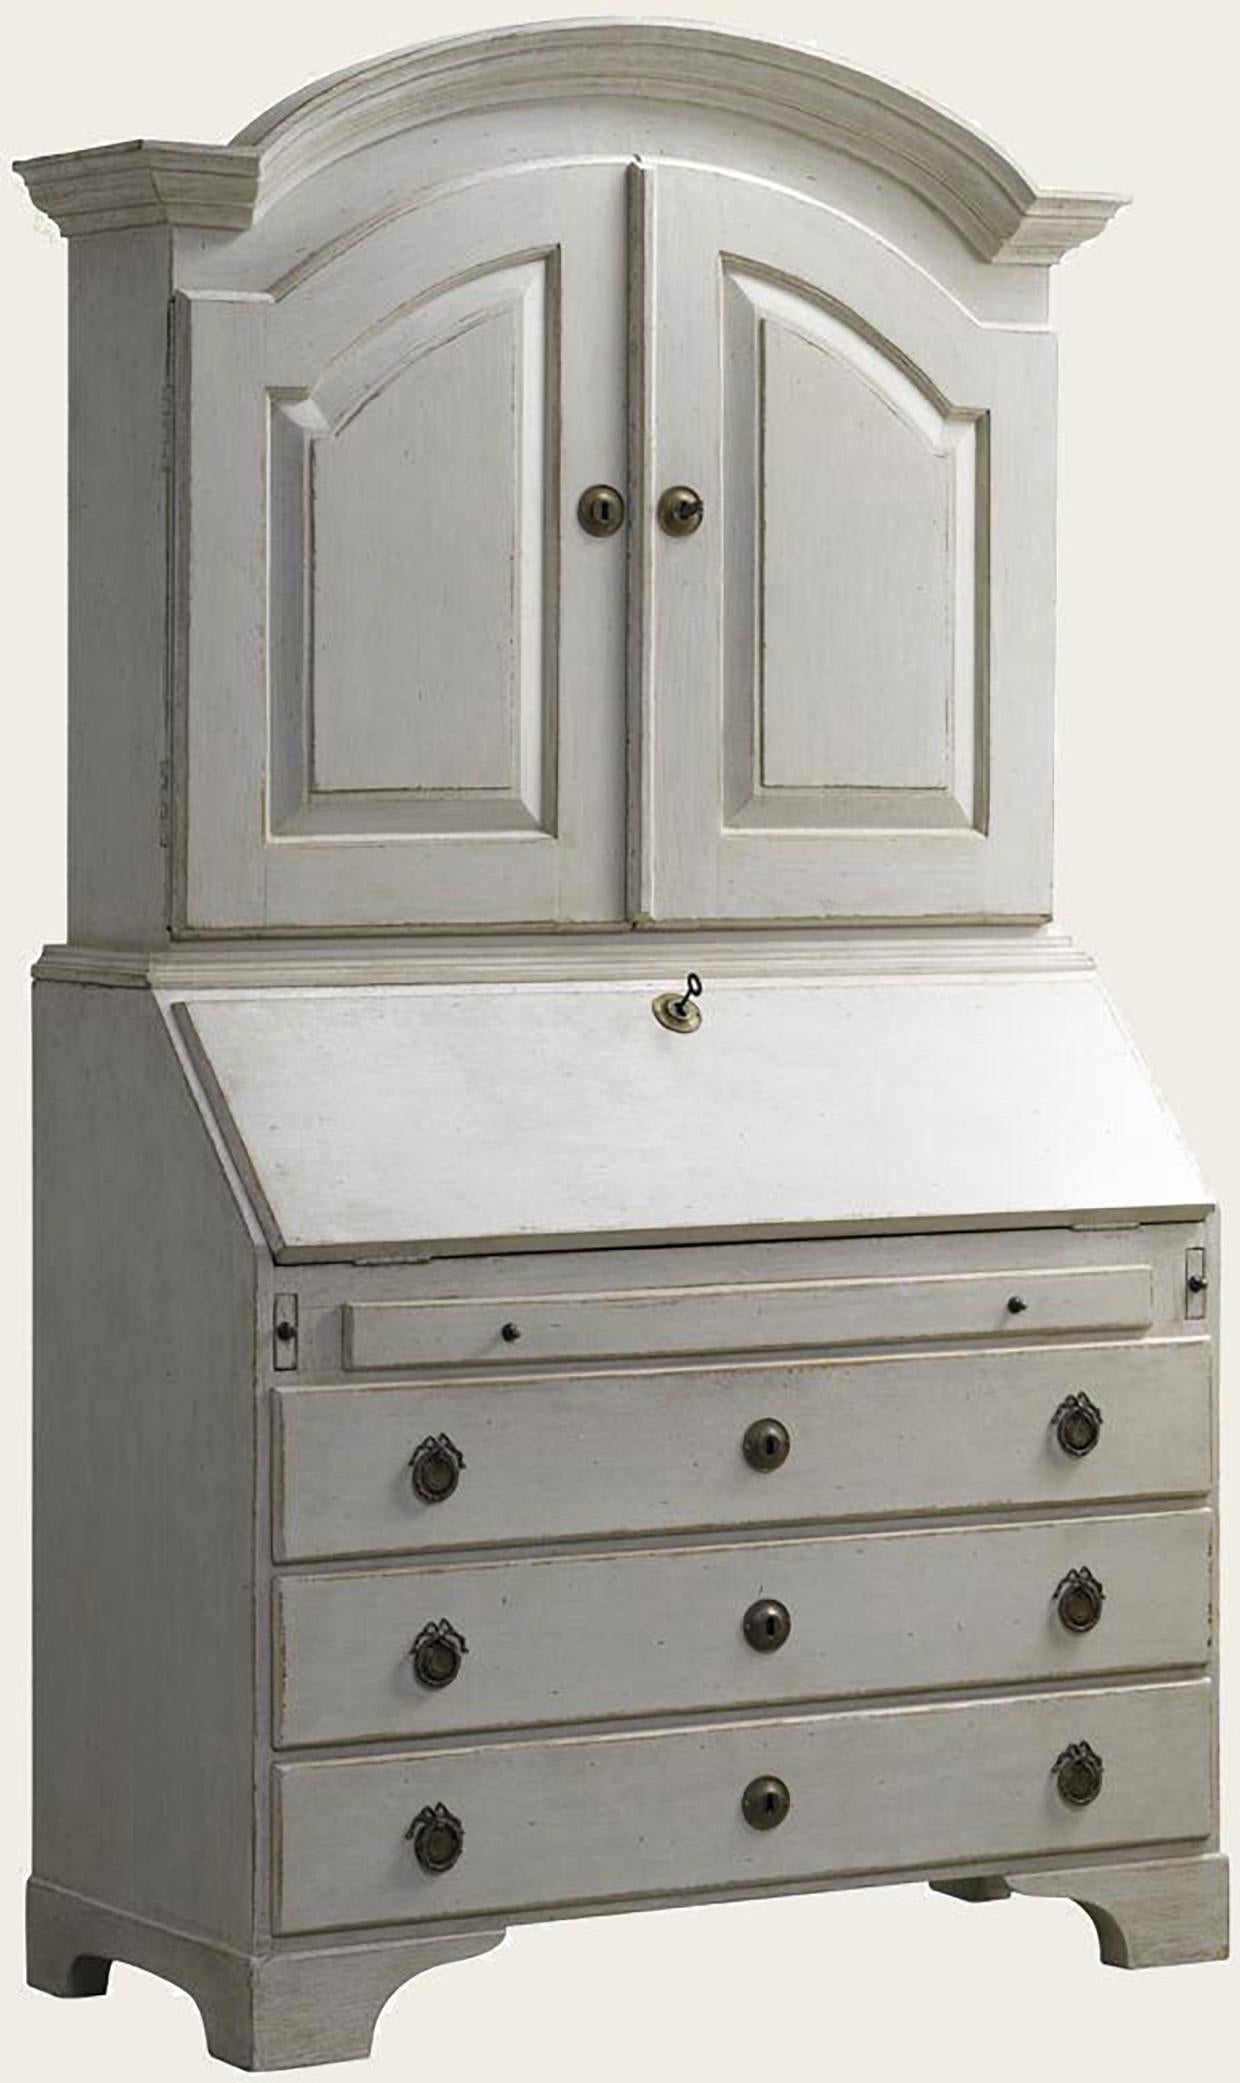 Distressed white painted Gustavian style bureau - secretaire. Hand carved and hand painted adds warmth to any room with it's great dimensions and country style coloring. Three shelves, numerous small drawers in the bureau bottom-half and larger